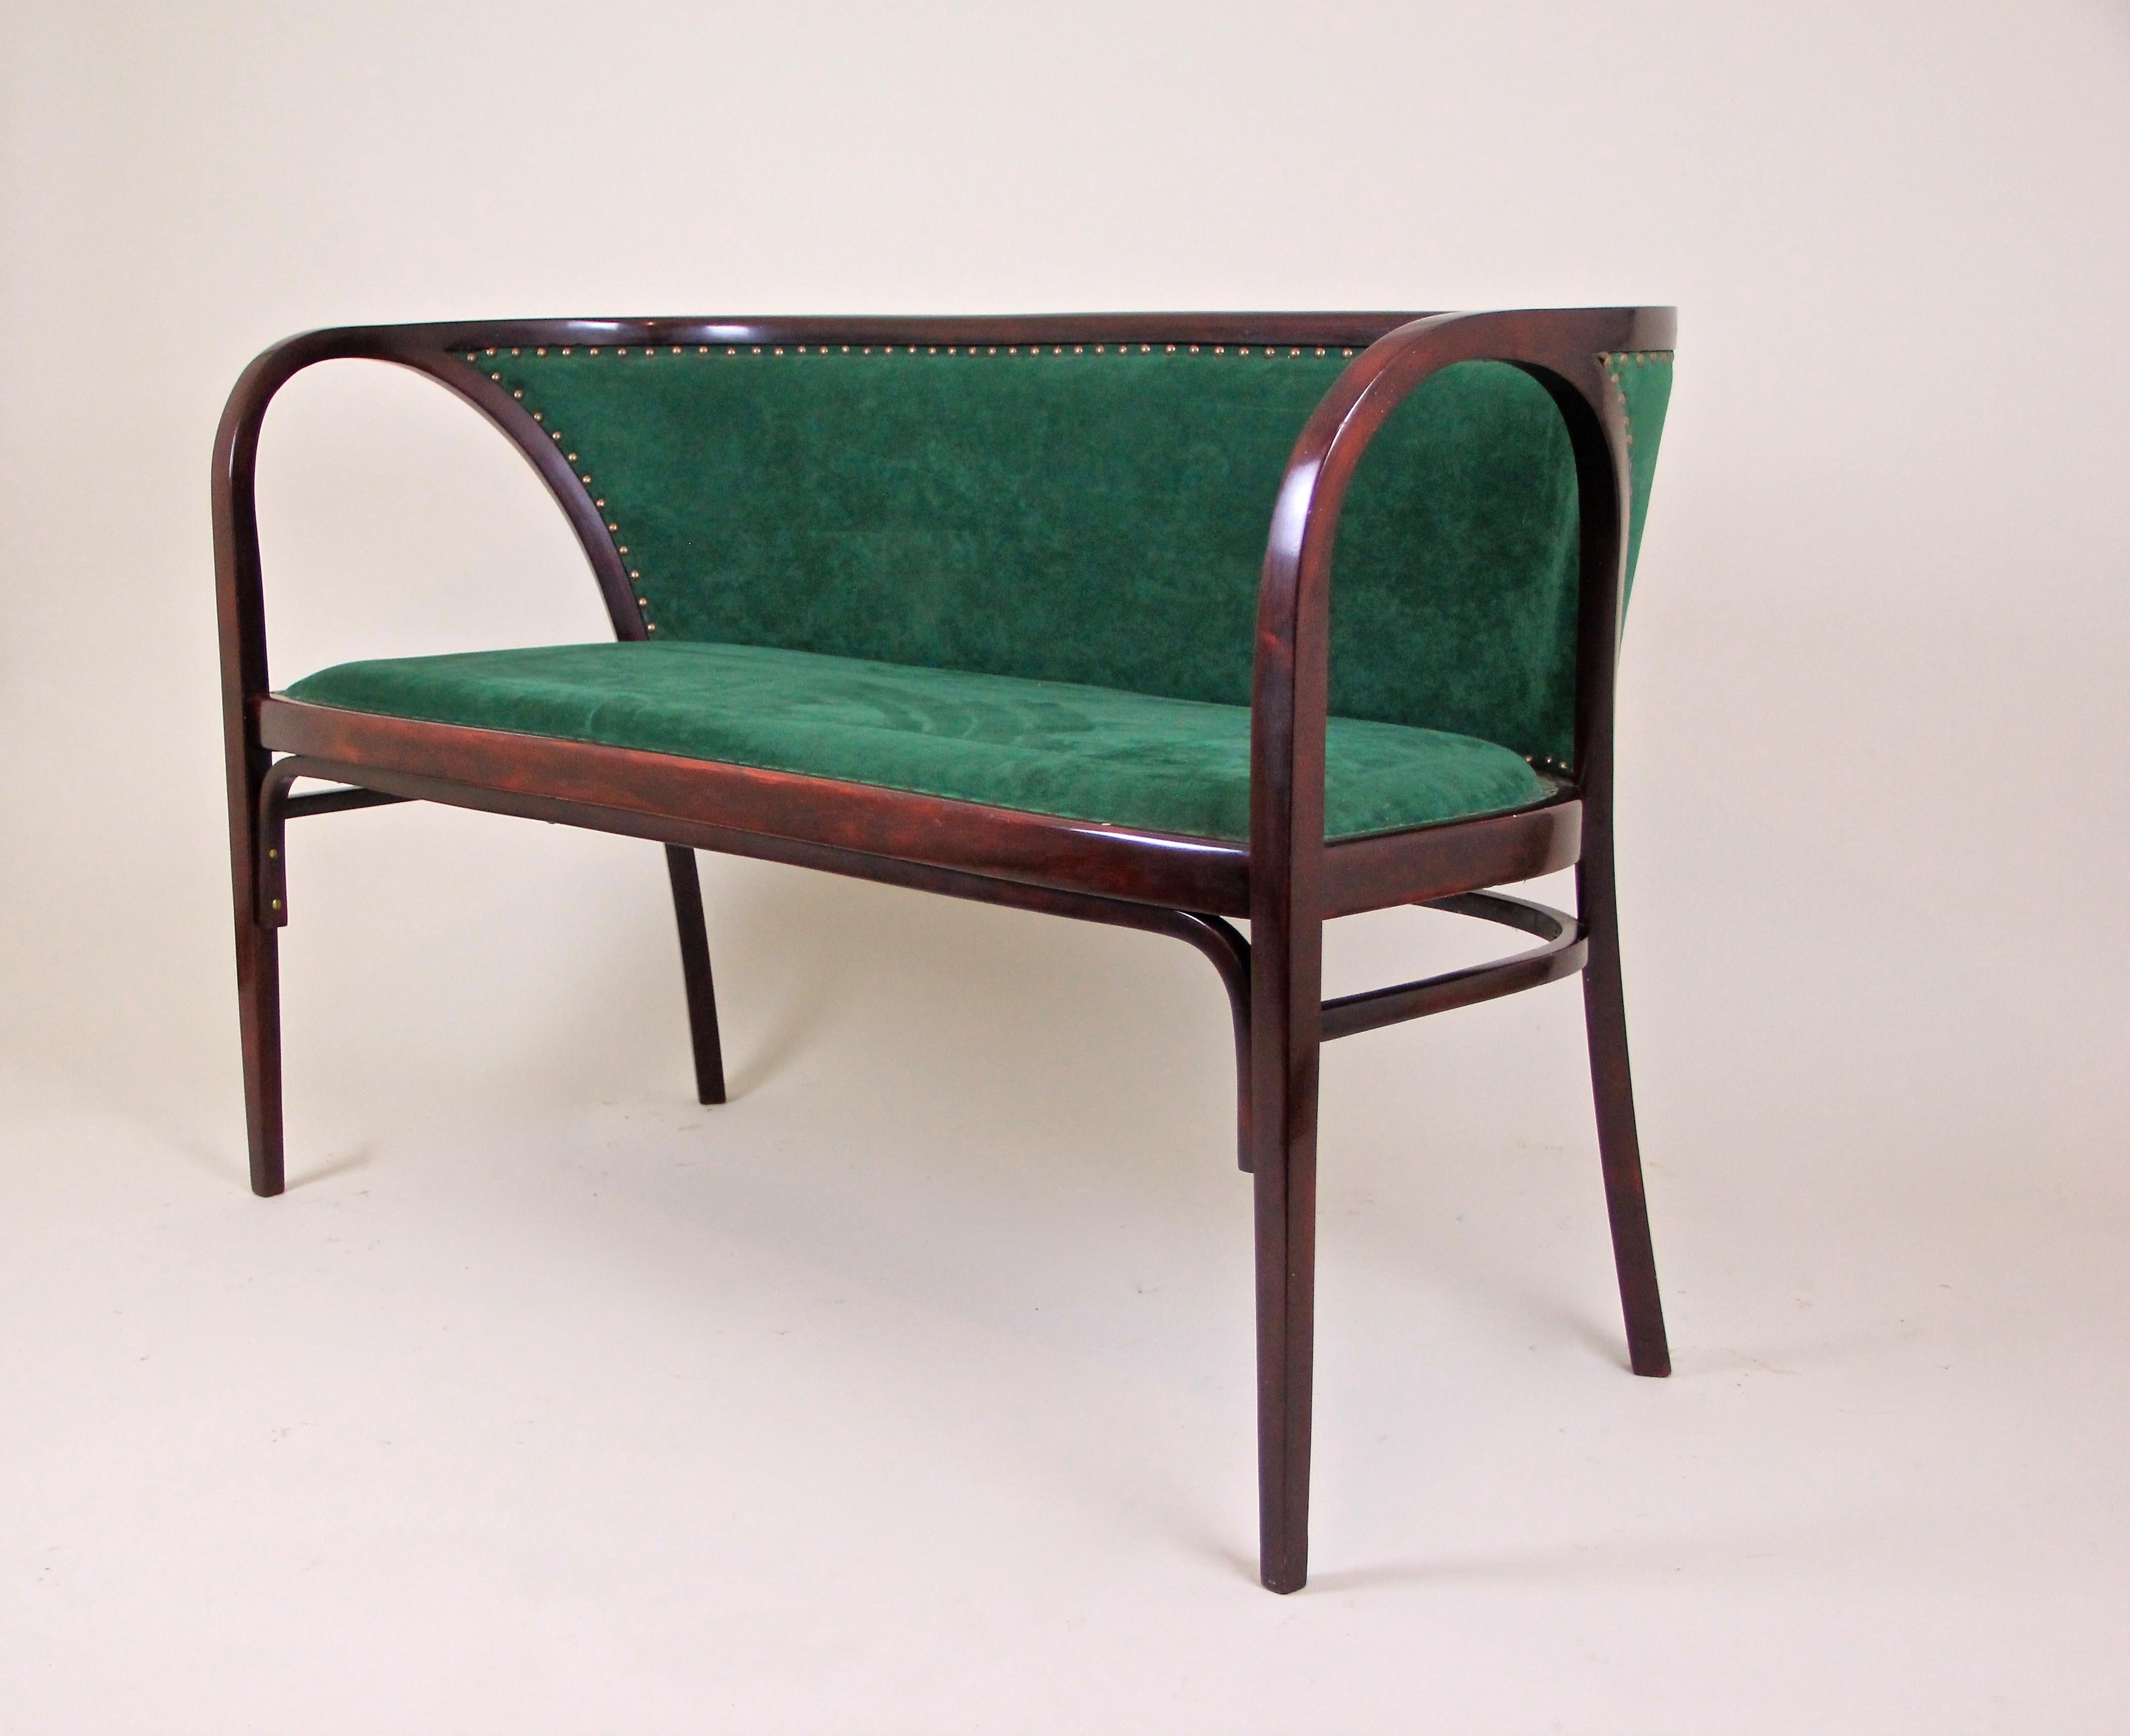 Thonet Bentwood Seating Set/ Salon Suite by M. Kammerer, Austria, circa 1910 For Sale 3